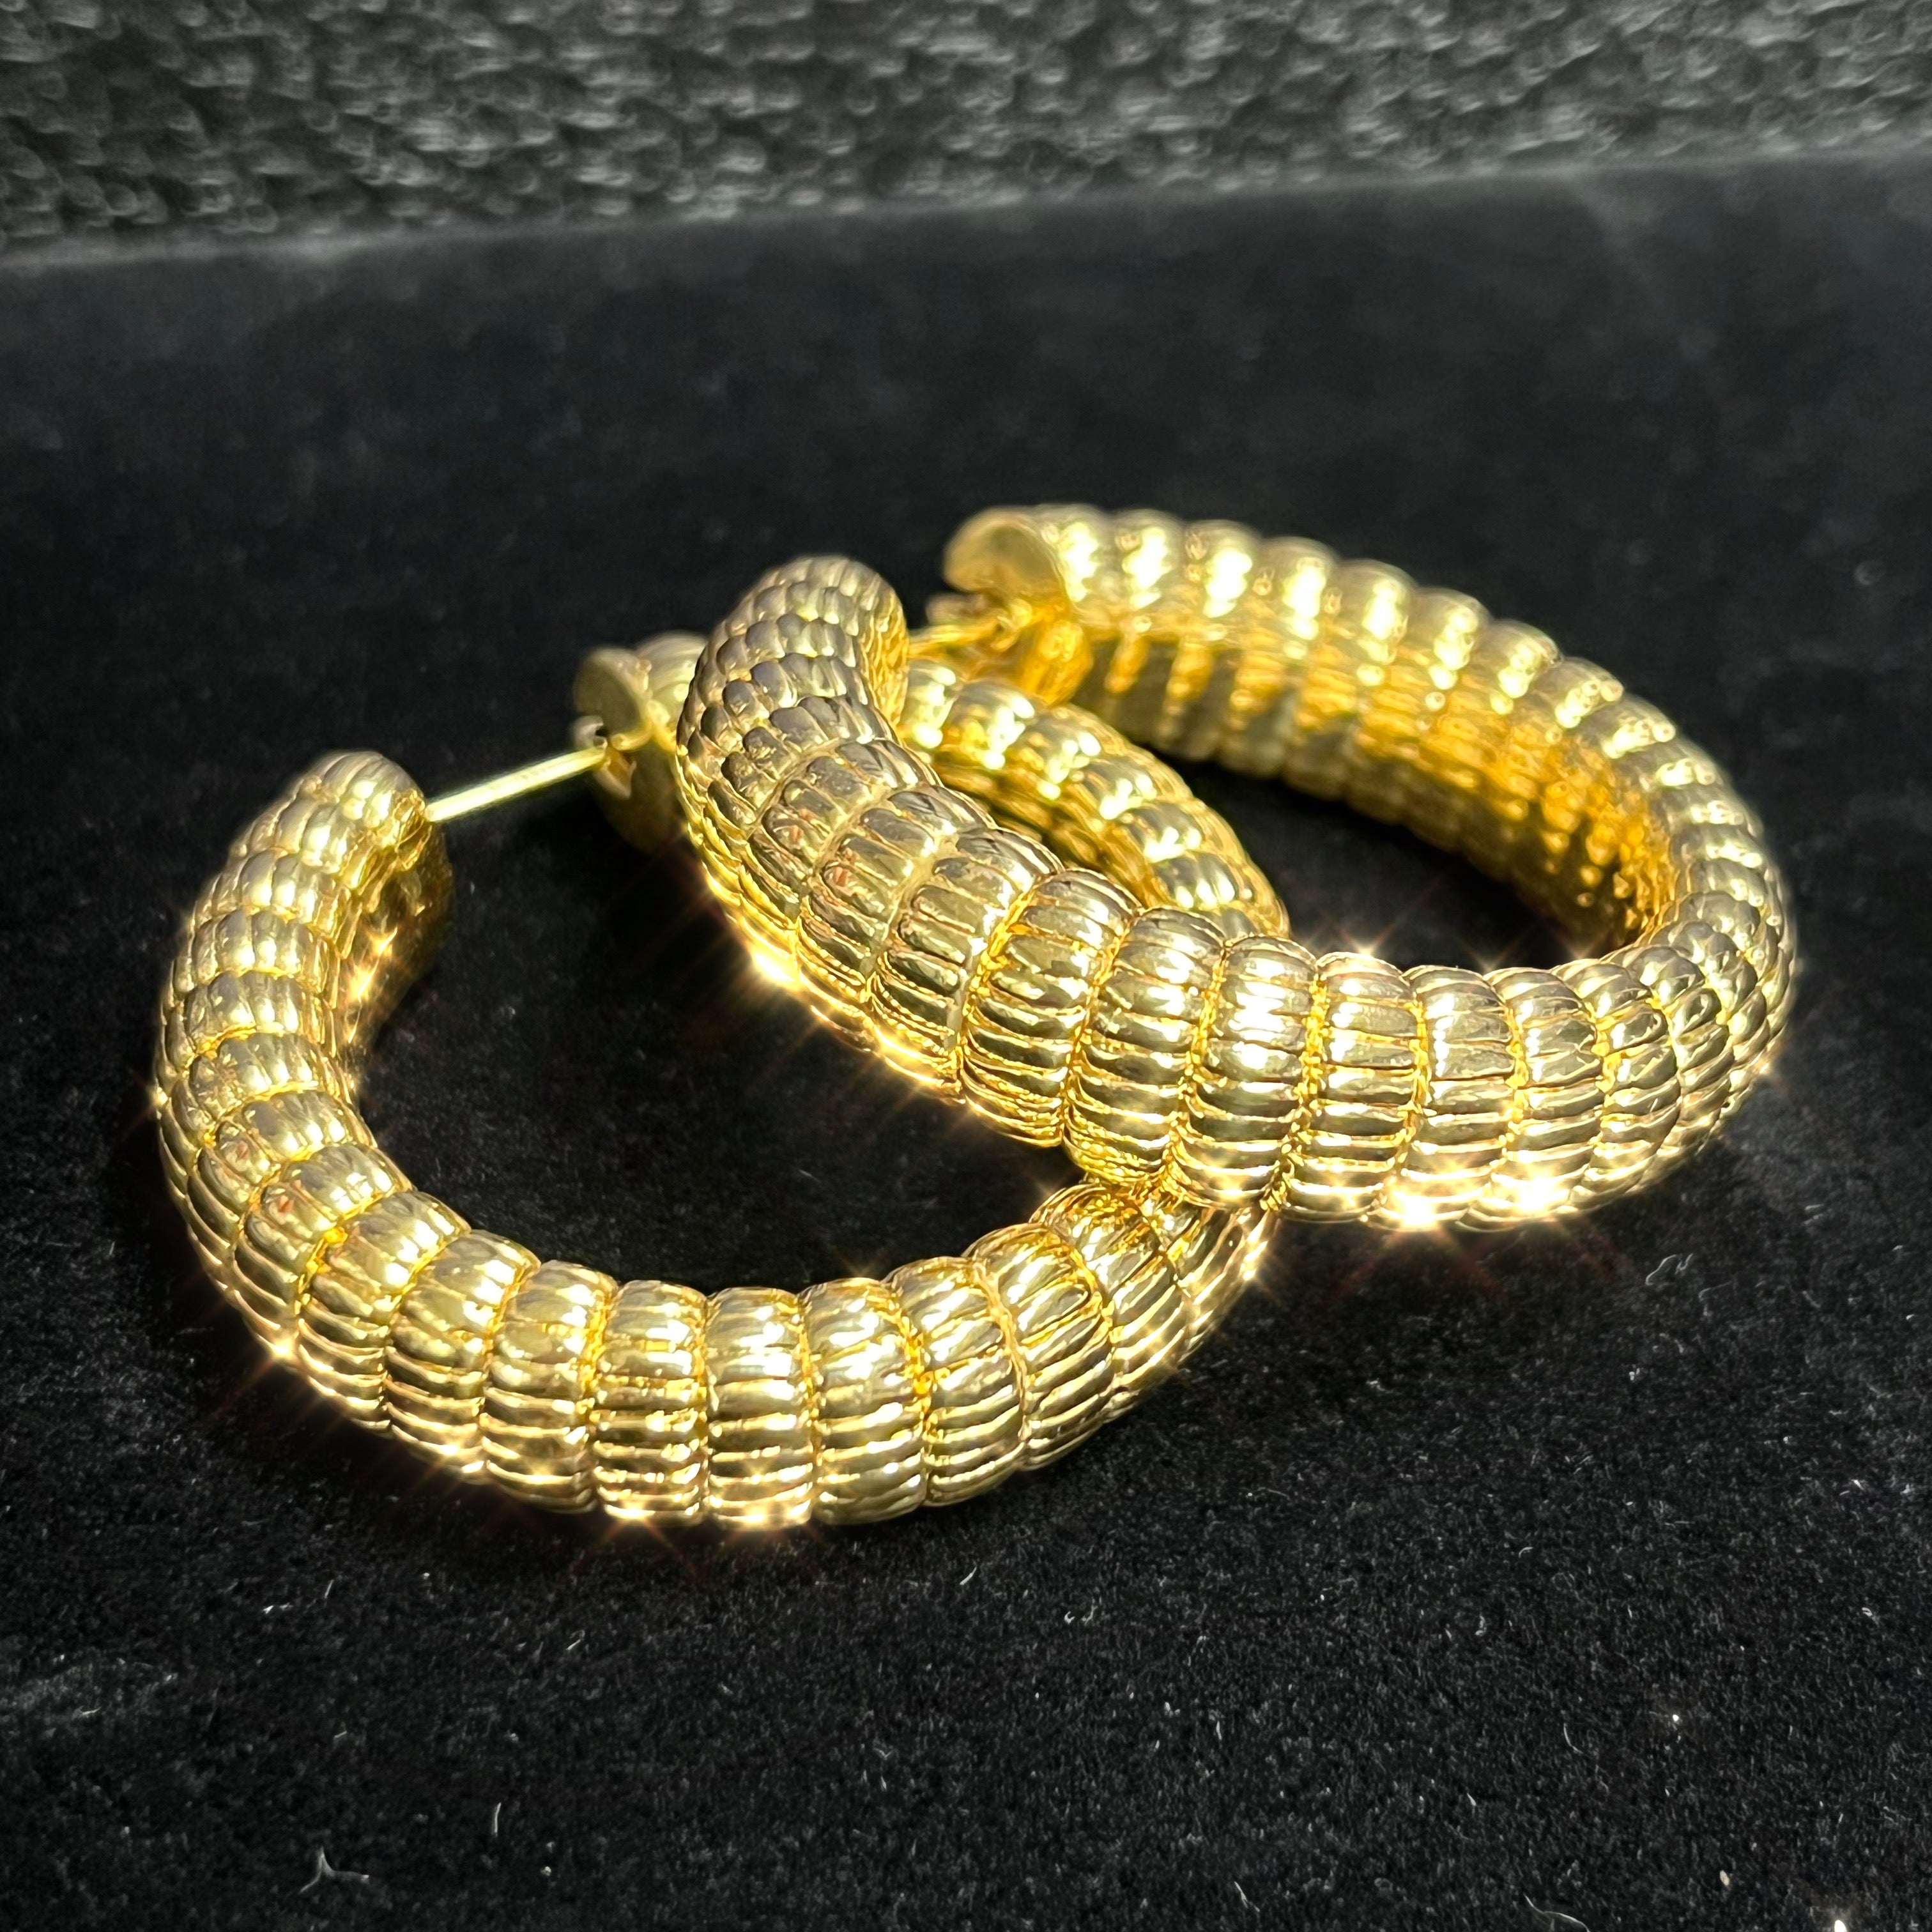 10mm Textured 1.8" 14K Yellow Gold Puffy Hoop Earrings